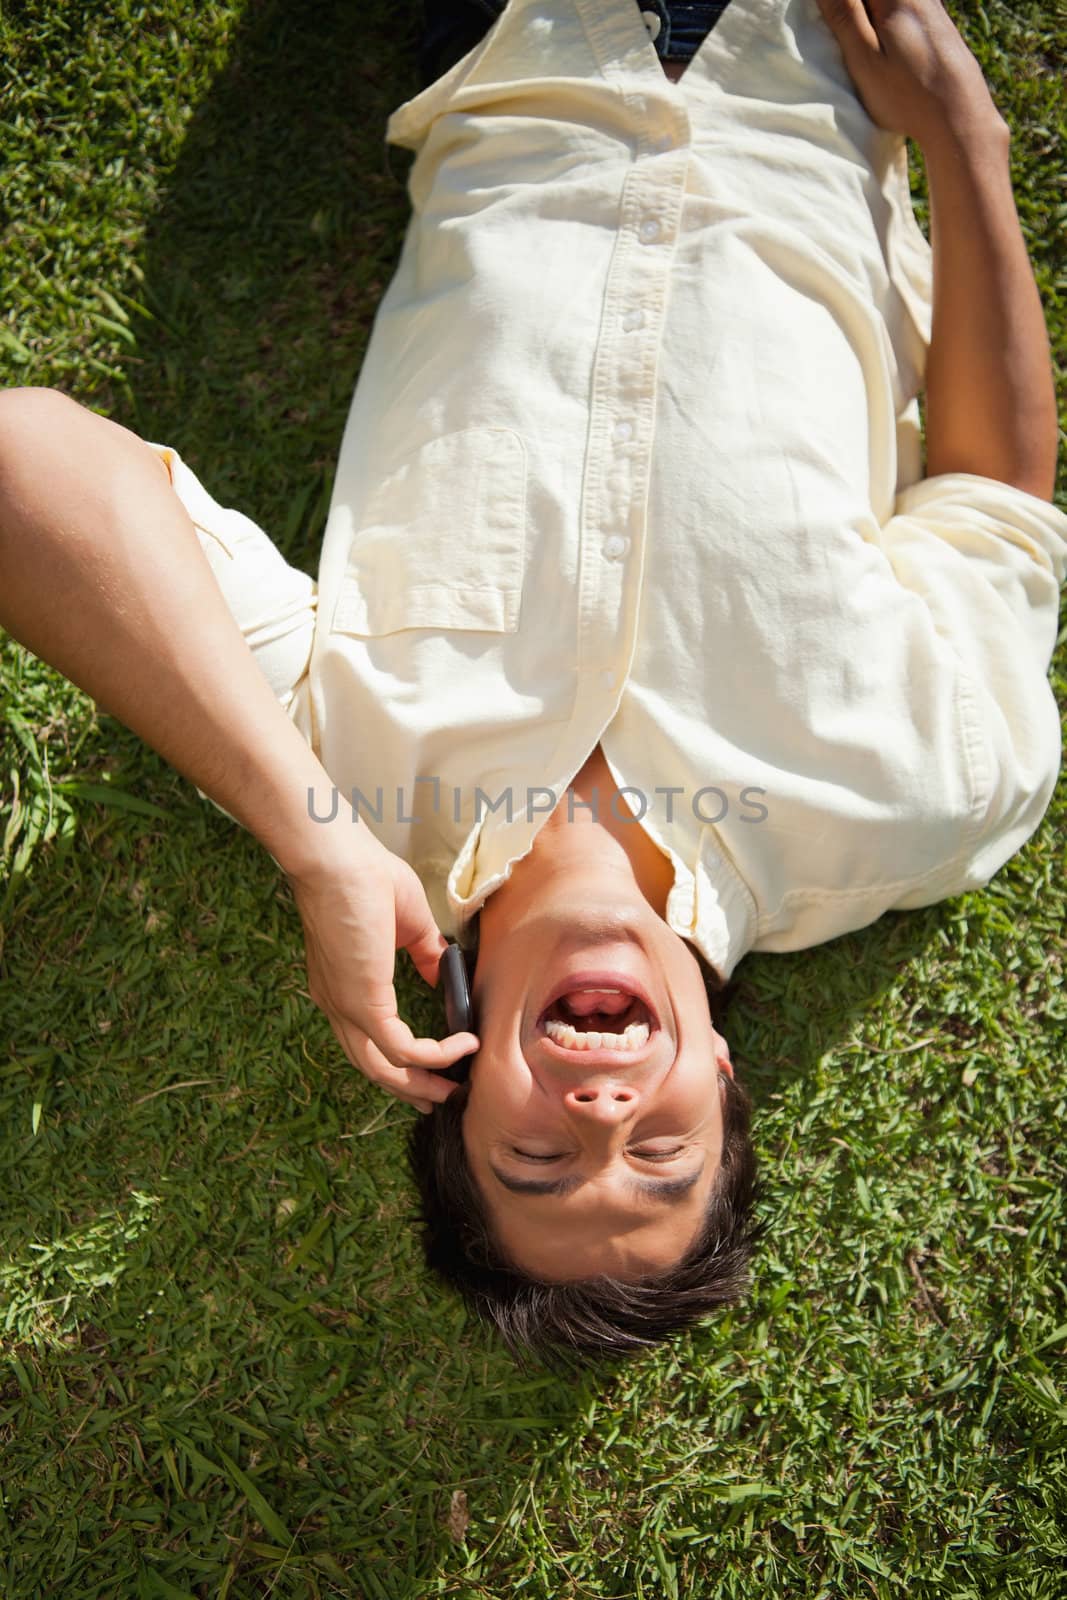 Man with his eyes closed laughing while using a mobile phone as he lies down on the grass